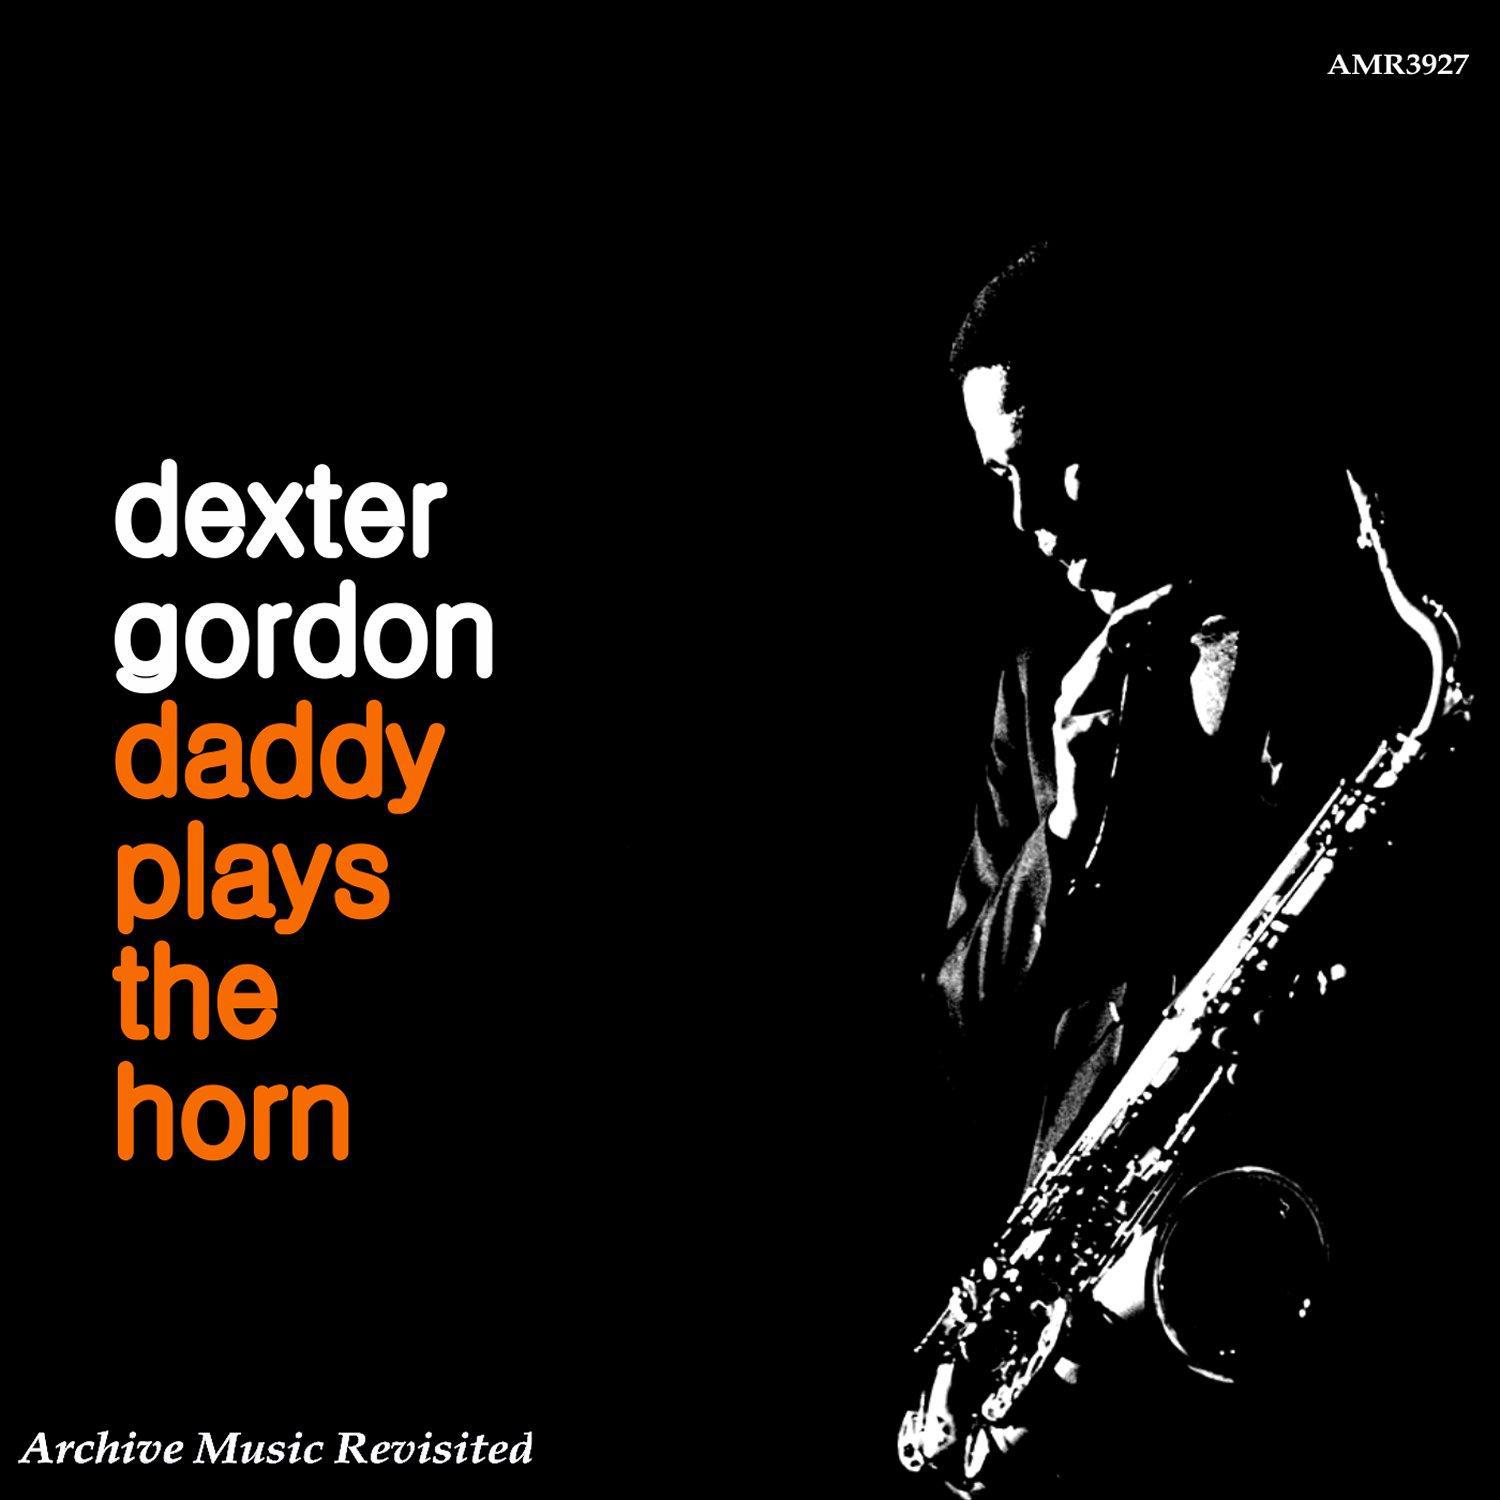 Daddy Plays the Horn